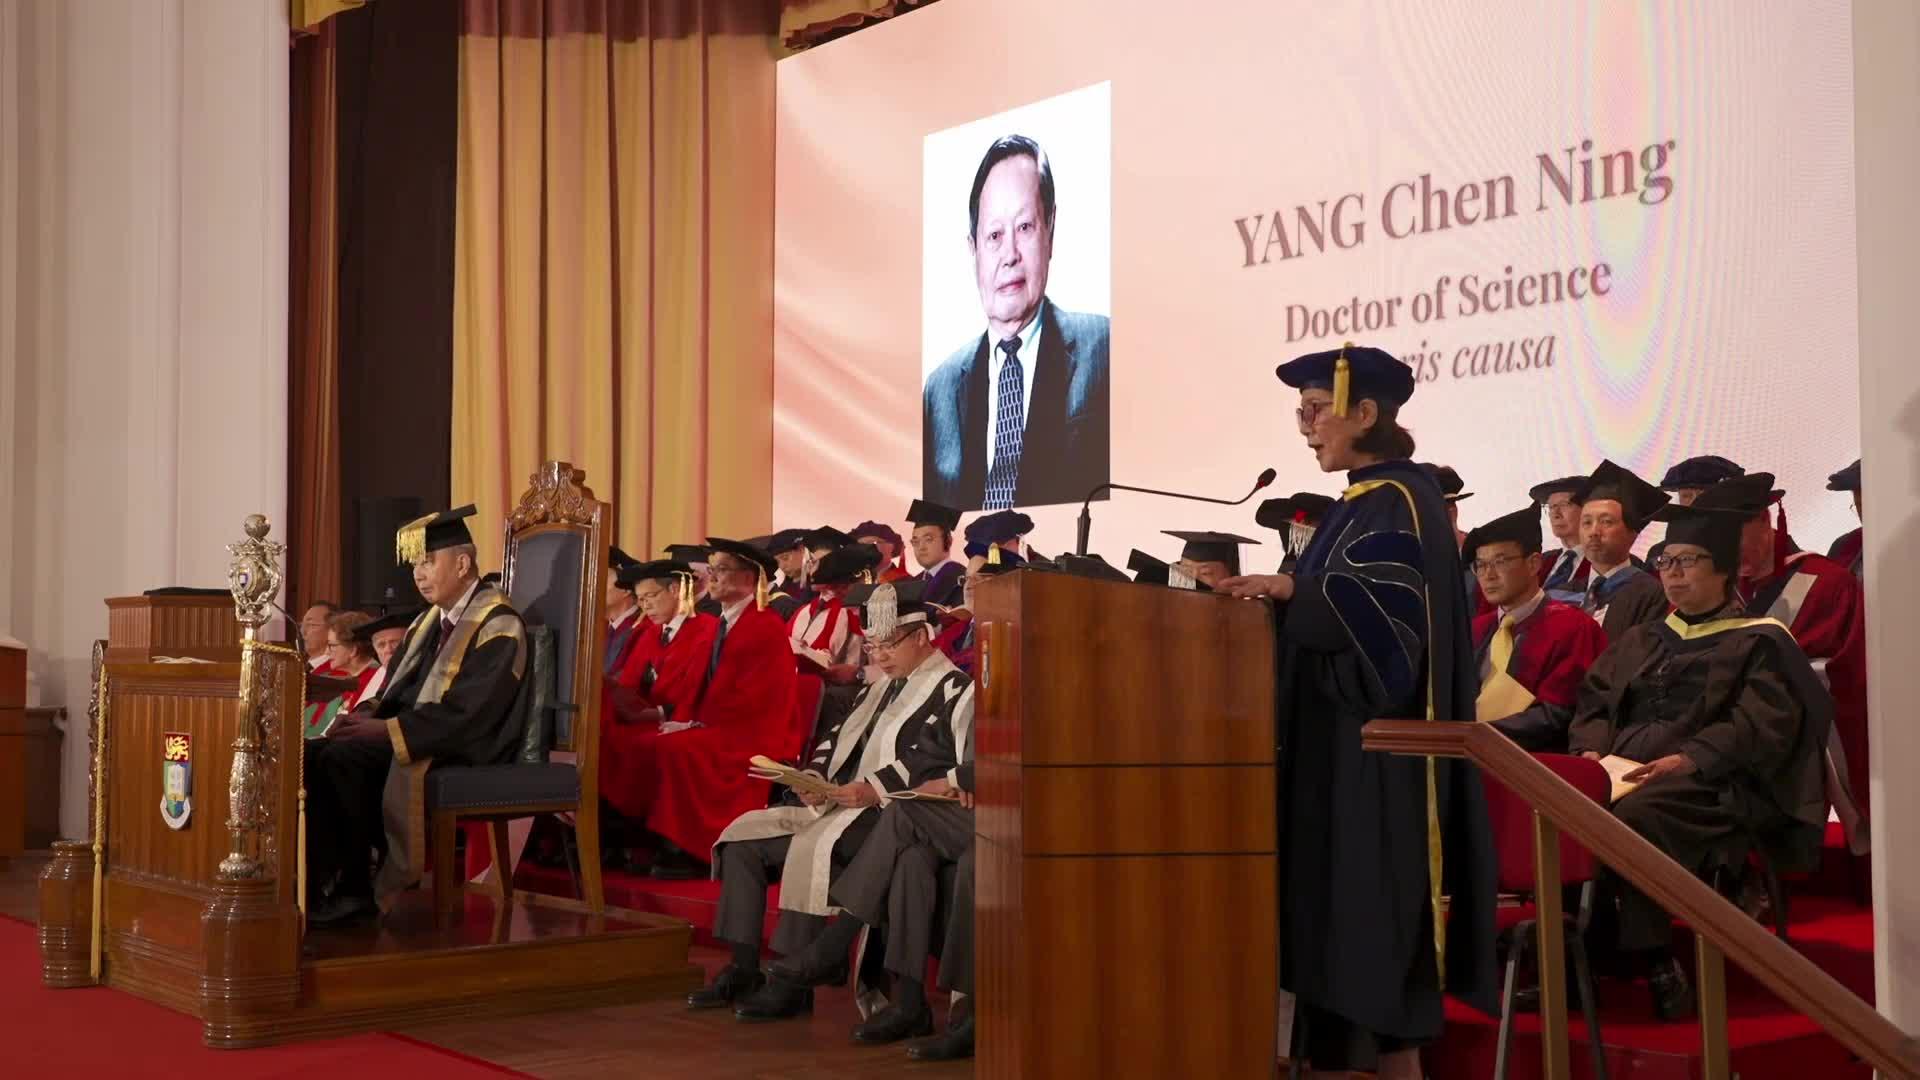 Conferment of Honorary Degree upon Professor YANG Chen Ning 